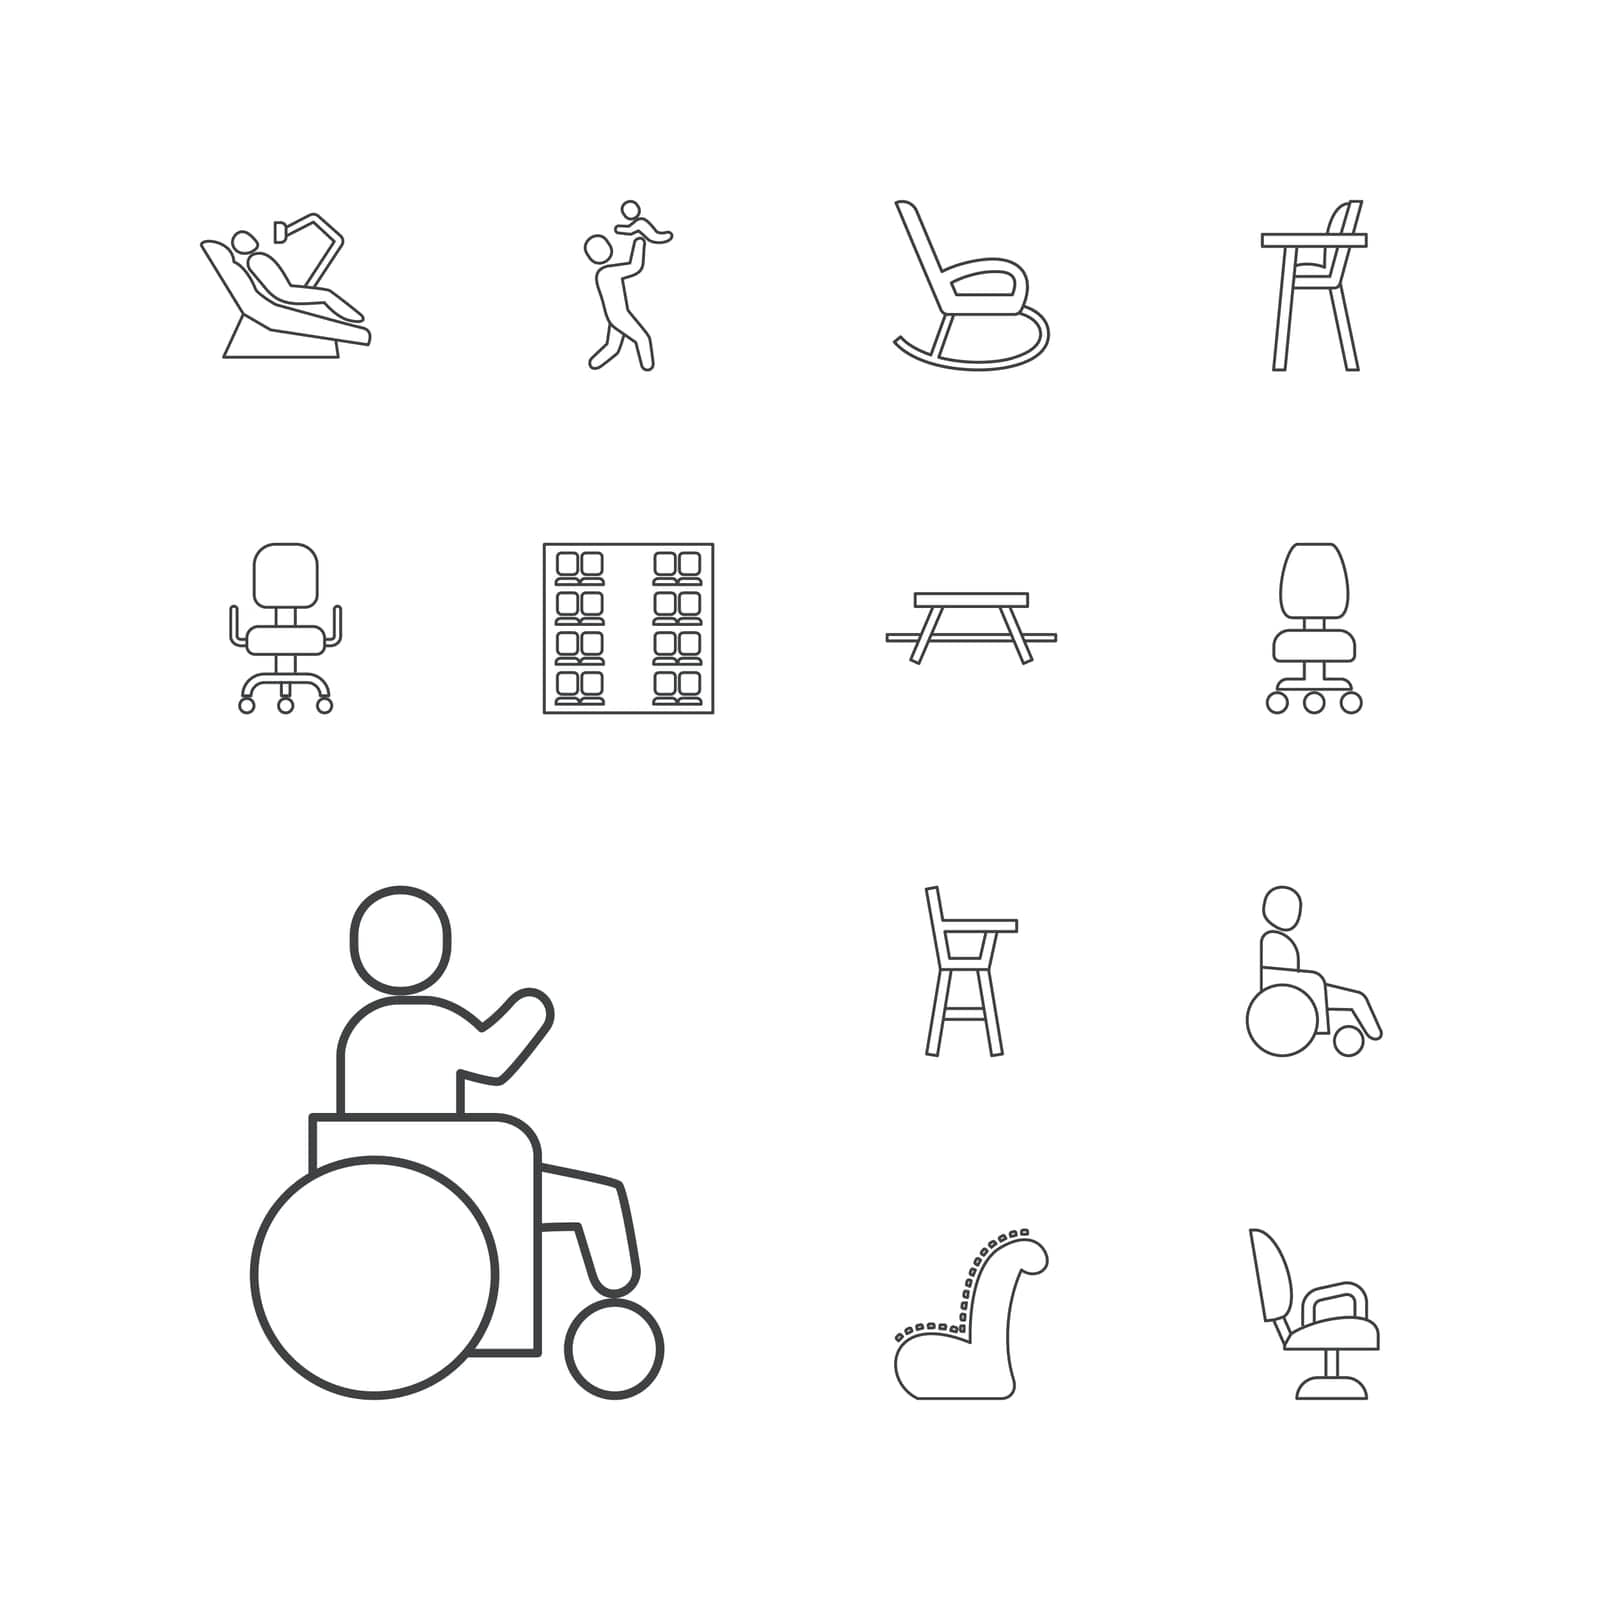 plane,symbol,father,icon,sign,isolated,rocking,office,seats,interior,white,modern,furniture,dental,armchair,flat,design,disabled,vector,man,barber,table,set,business,work,chair,black,eating,seat,outdoor,with,background,baby,style,illustration,object by ogqcorp